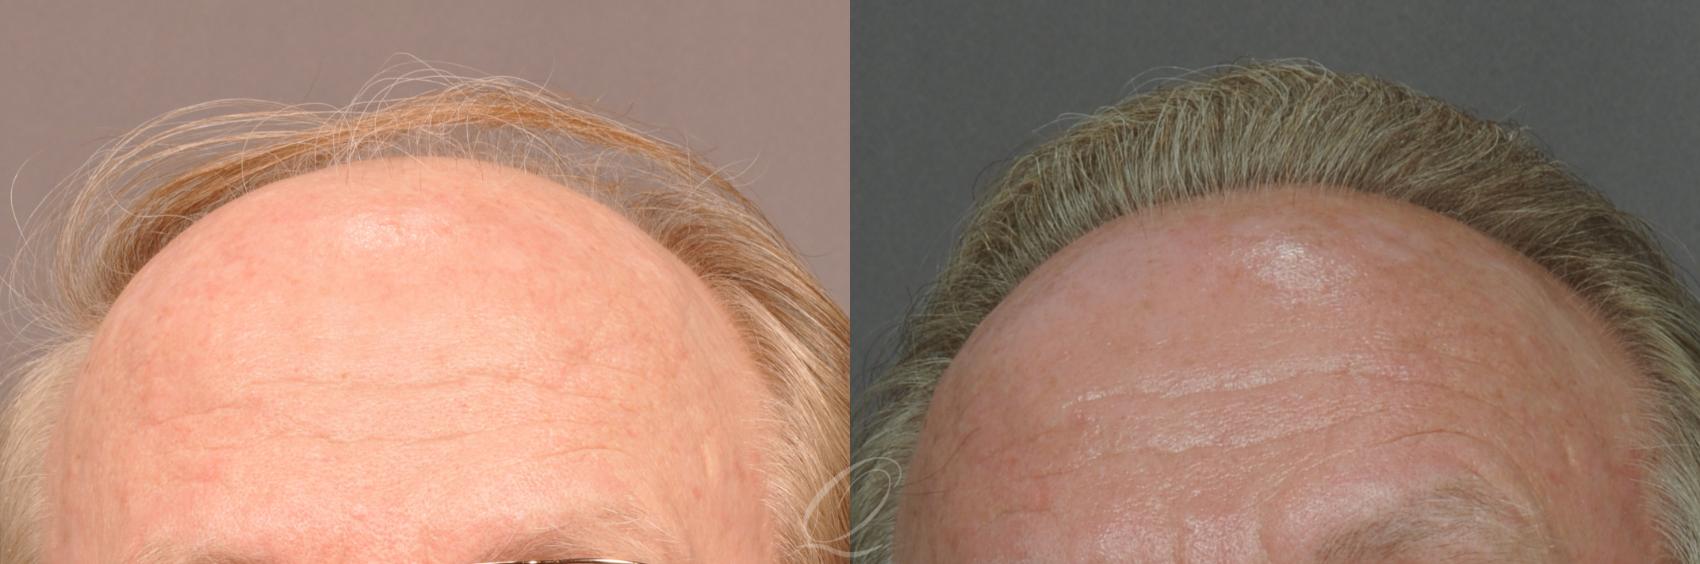 FUT Case 1019 Before & After View #1 | Rochester, NY | Quatela Center for Hair Restoration